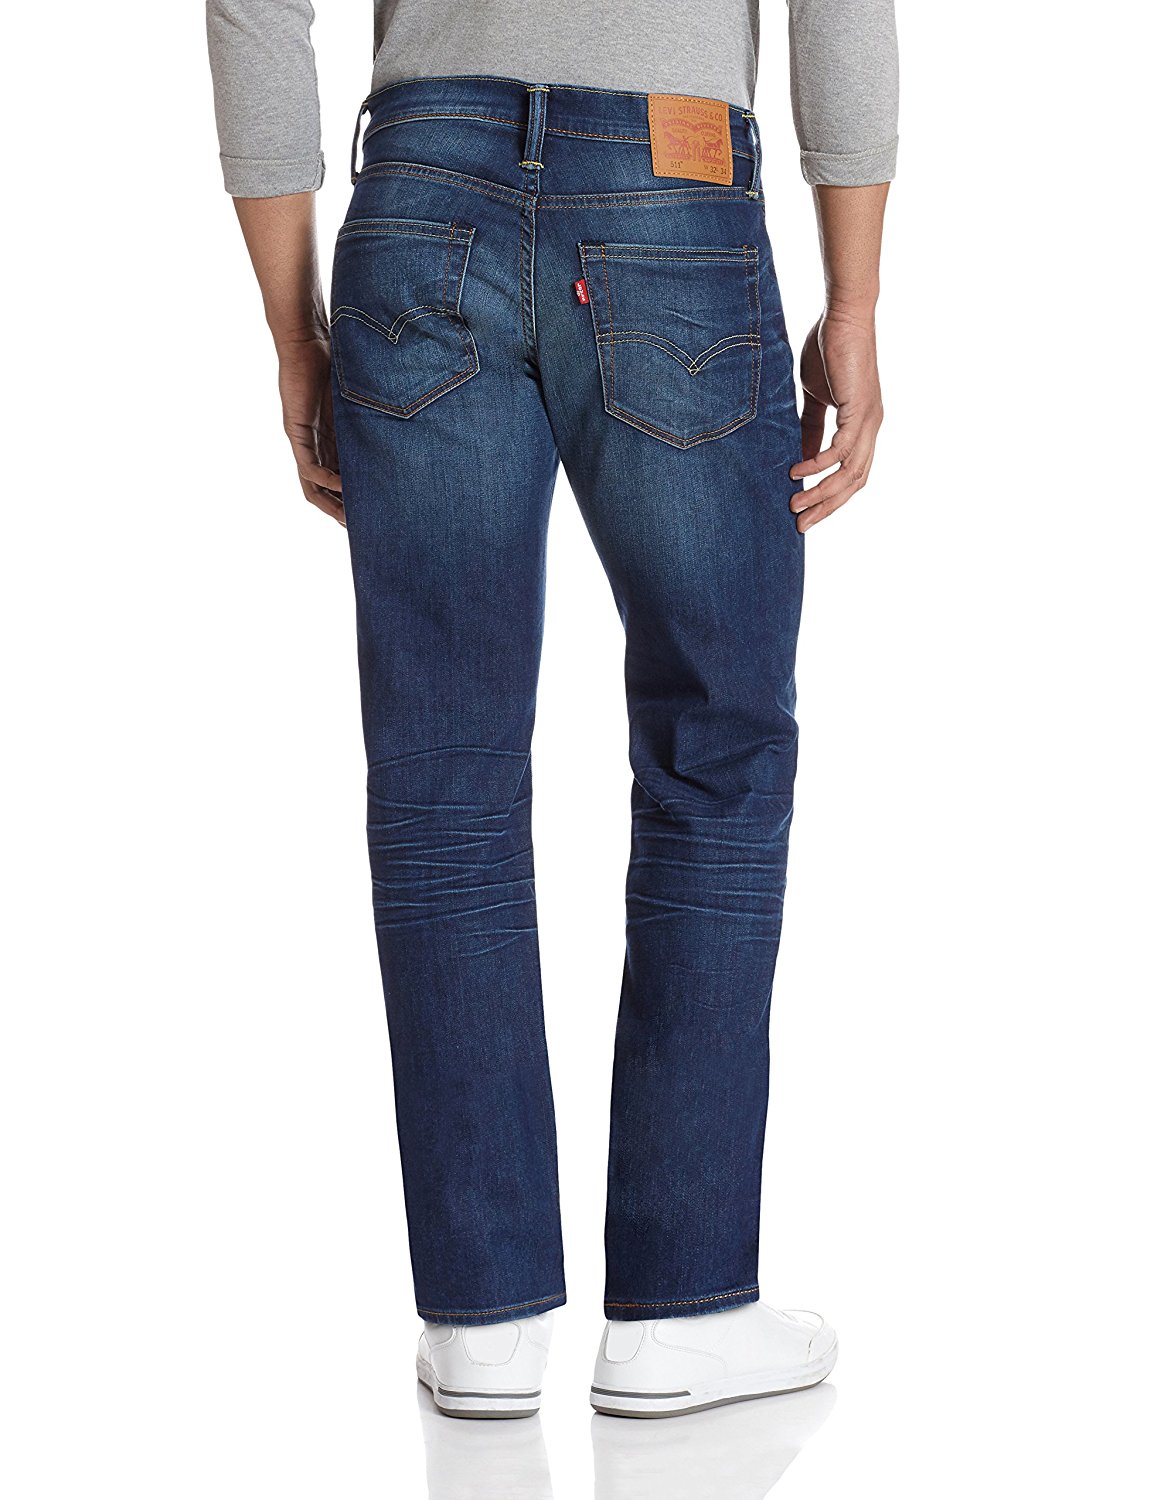 Buy Levis Men Straight Fit Jeans 65504 Series Online @ ₹1600 from ShopClues